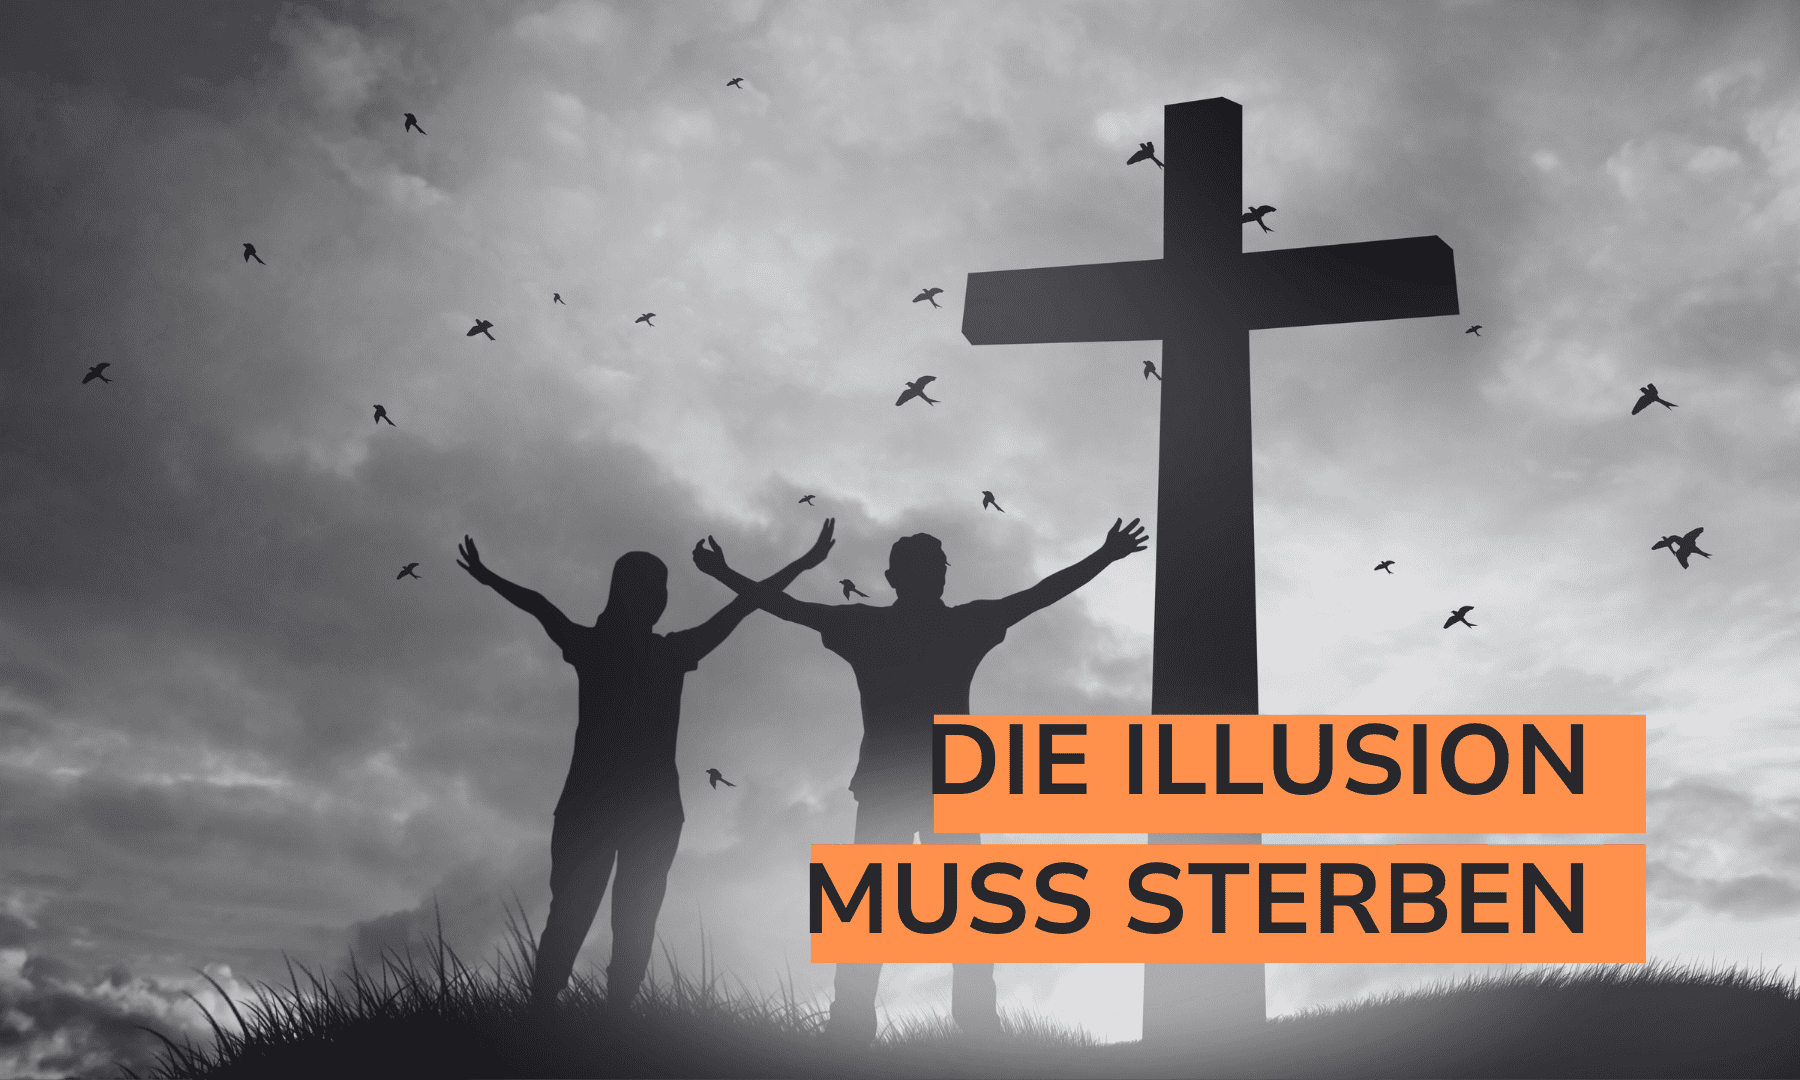 You are currently viewing Die Illusion muss sterben